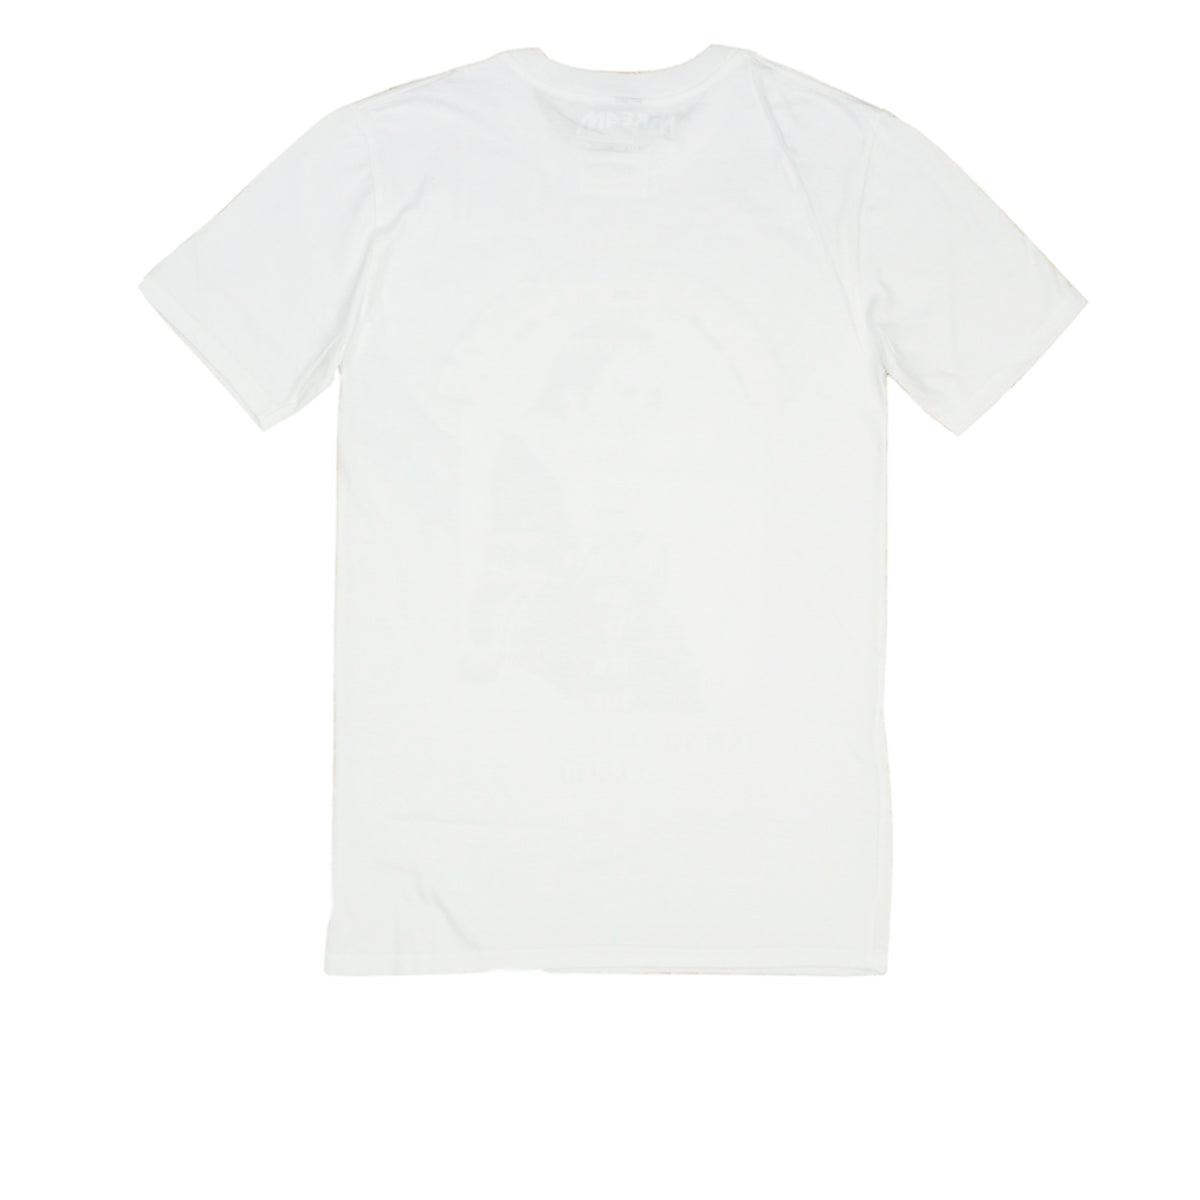 Bad Influence Prpl/Red Tee (White) /D8